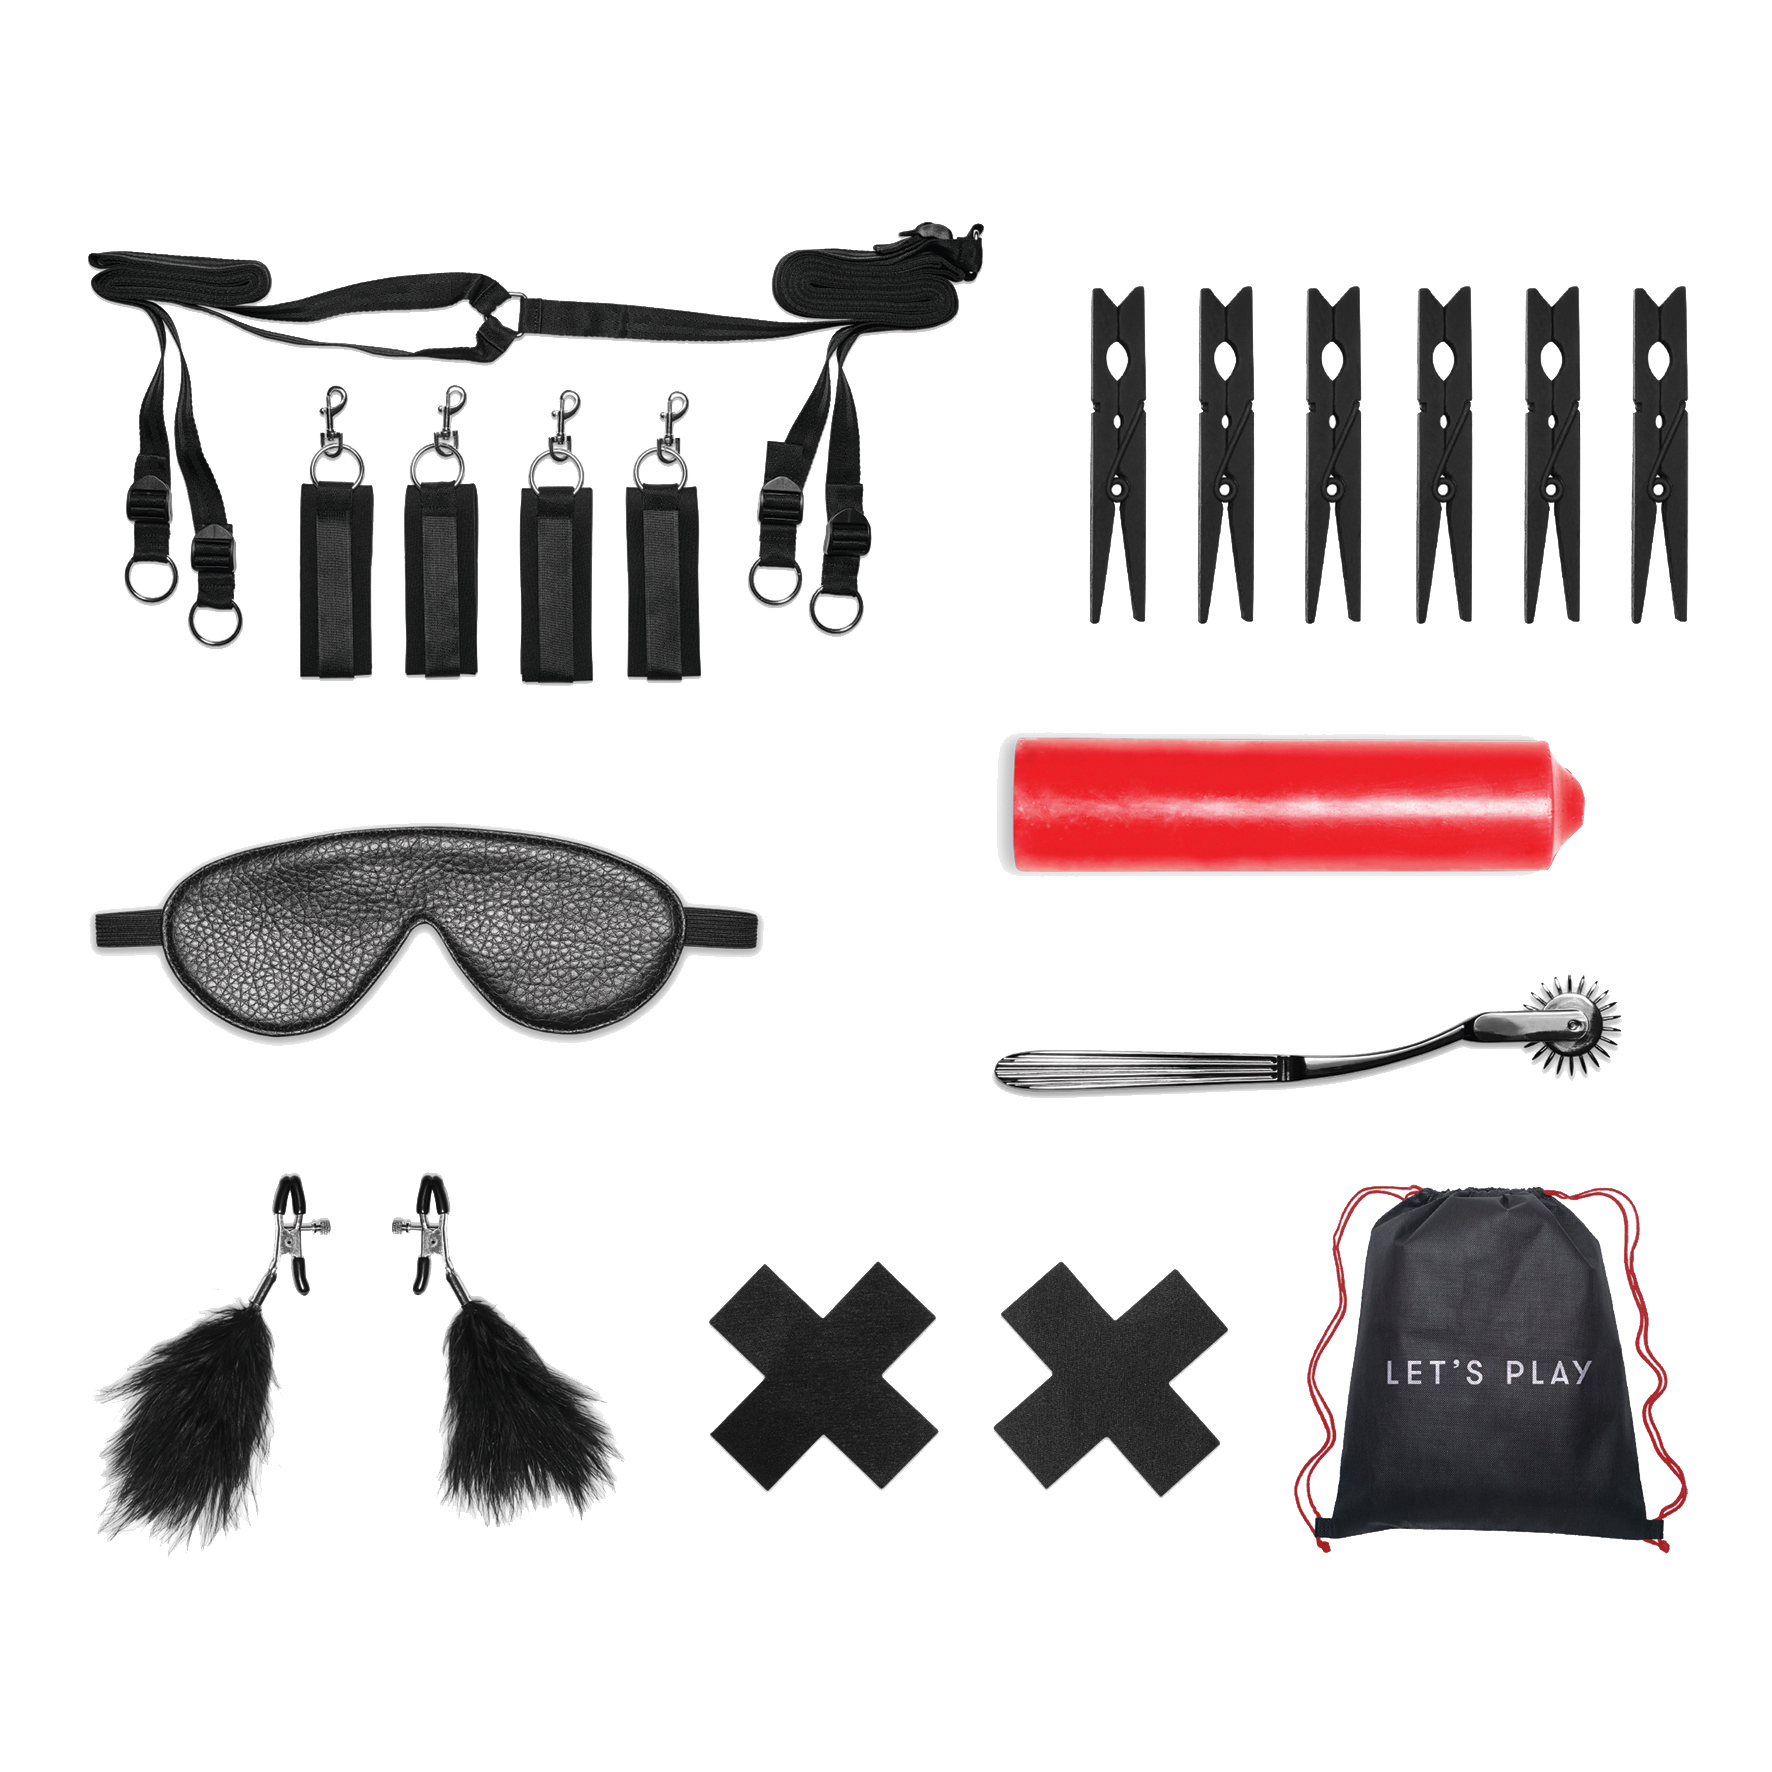 LUX FETISH Bedspreaders Sensory Experience (7pc)